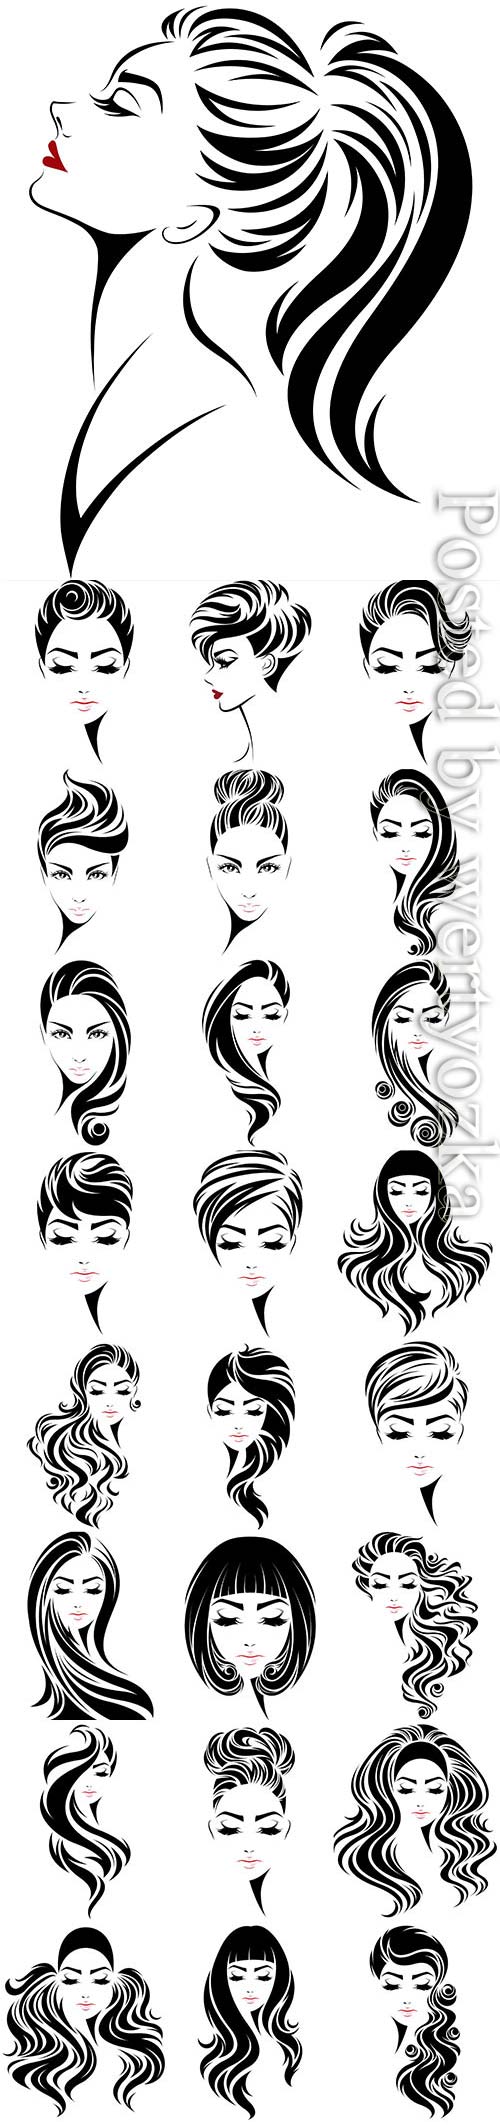 Drawn faces of girls with different hairstyles in vector